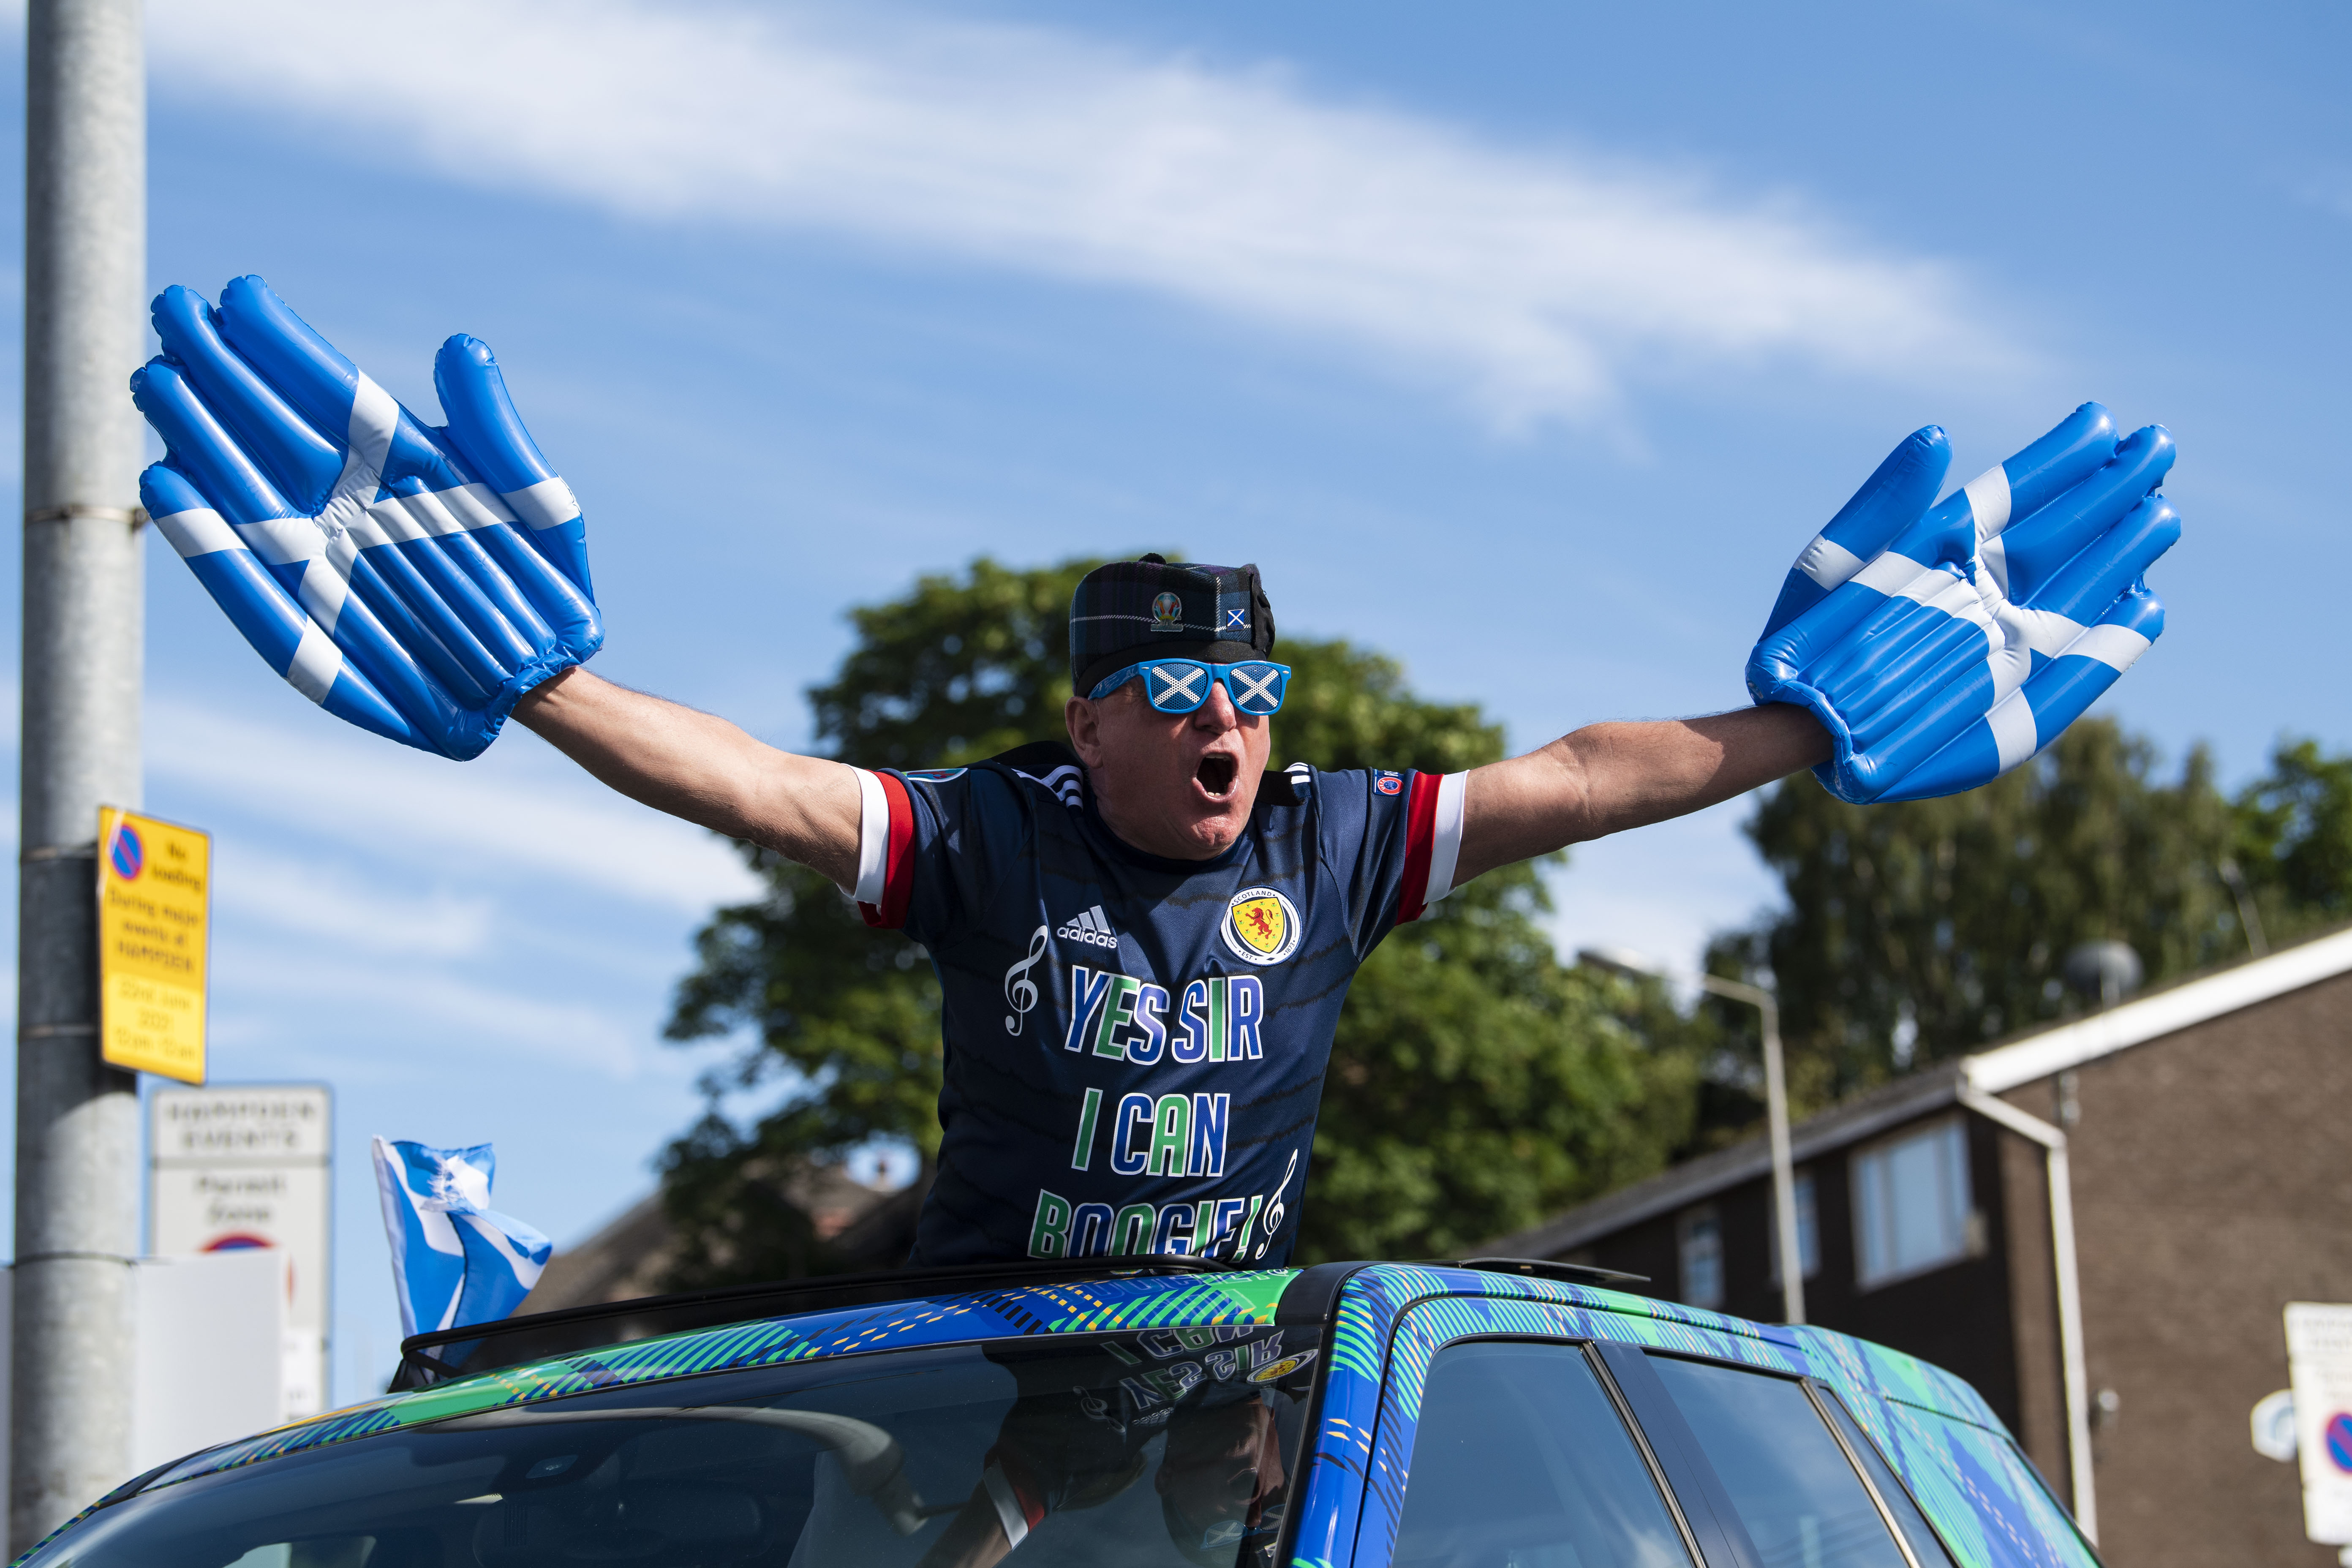 True support: Scotland fan shows his support from outside the stadium ahead of kick off.